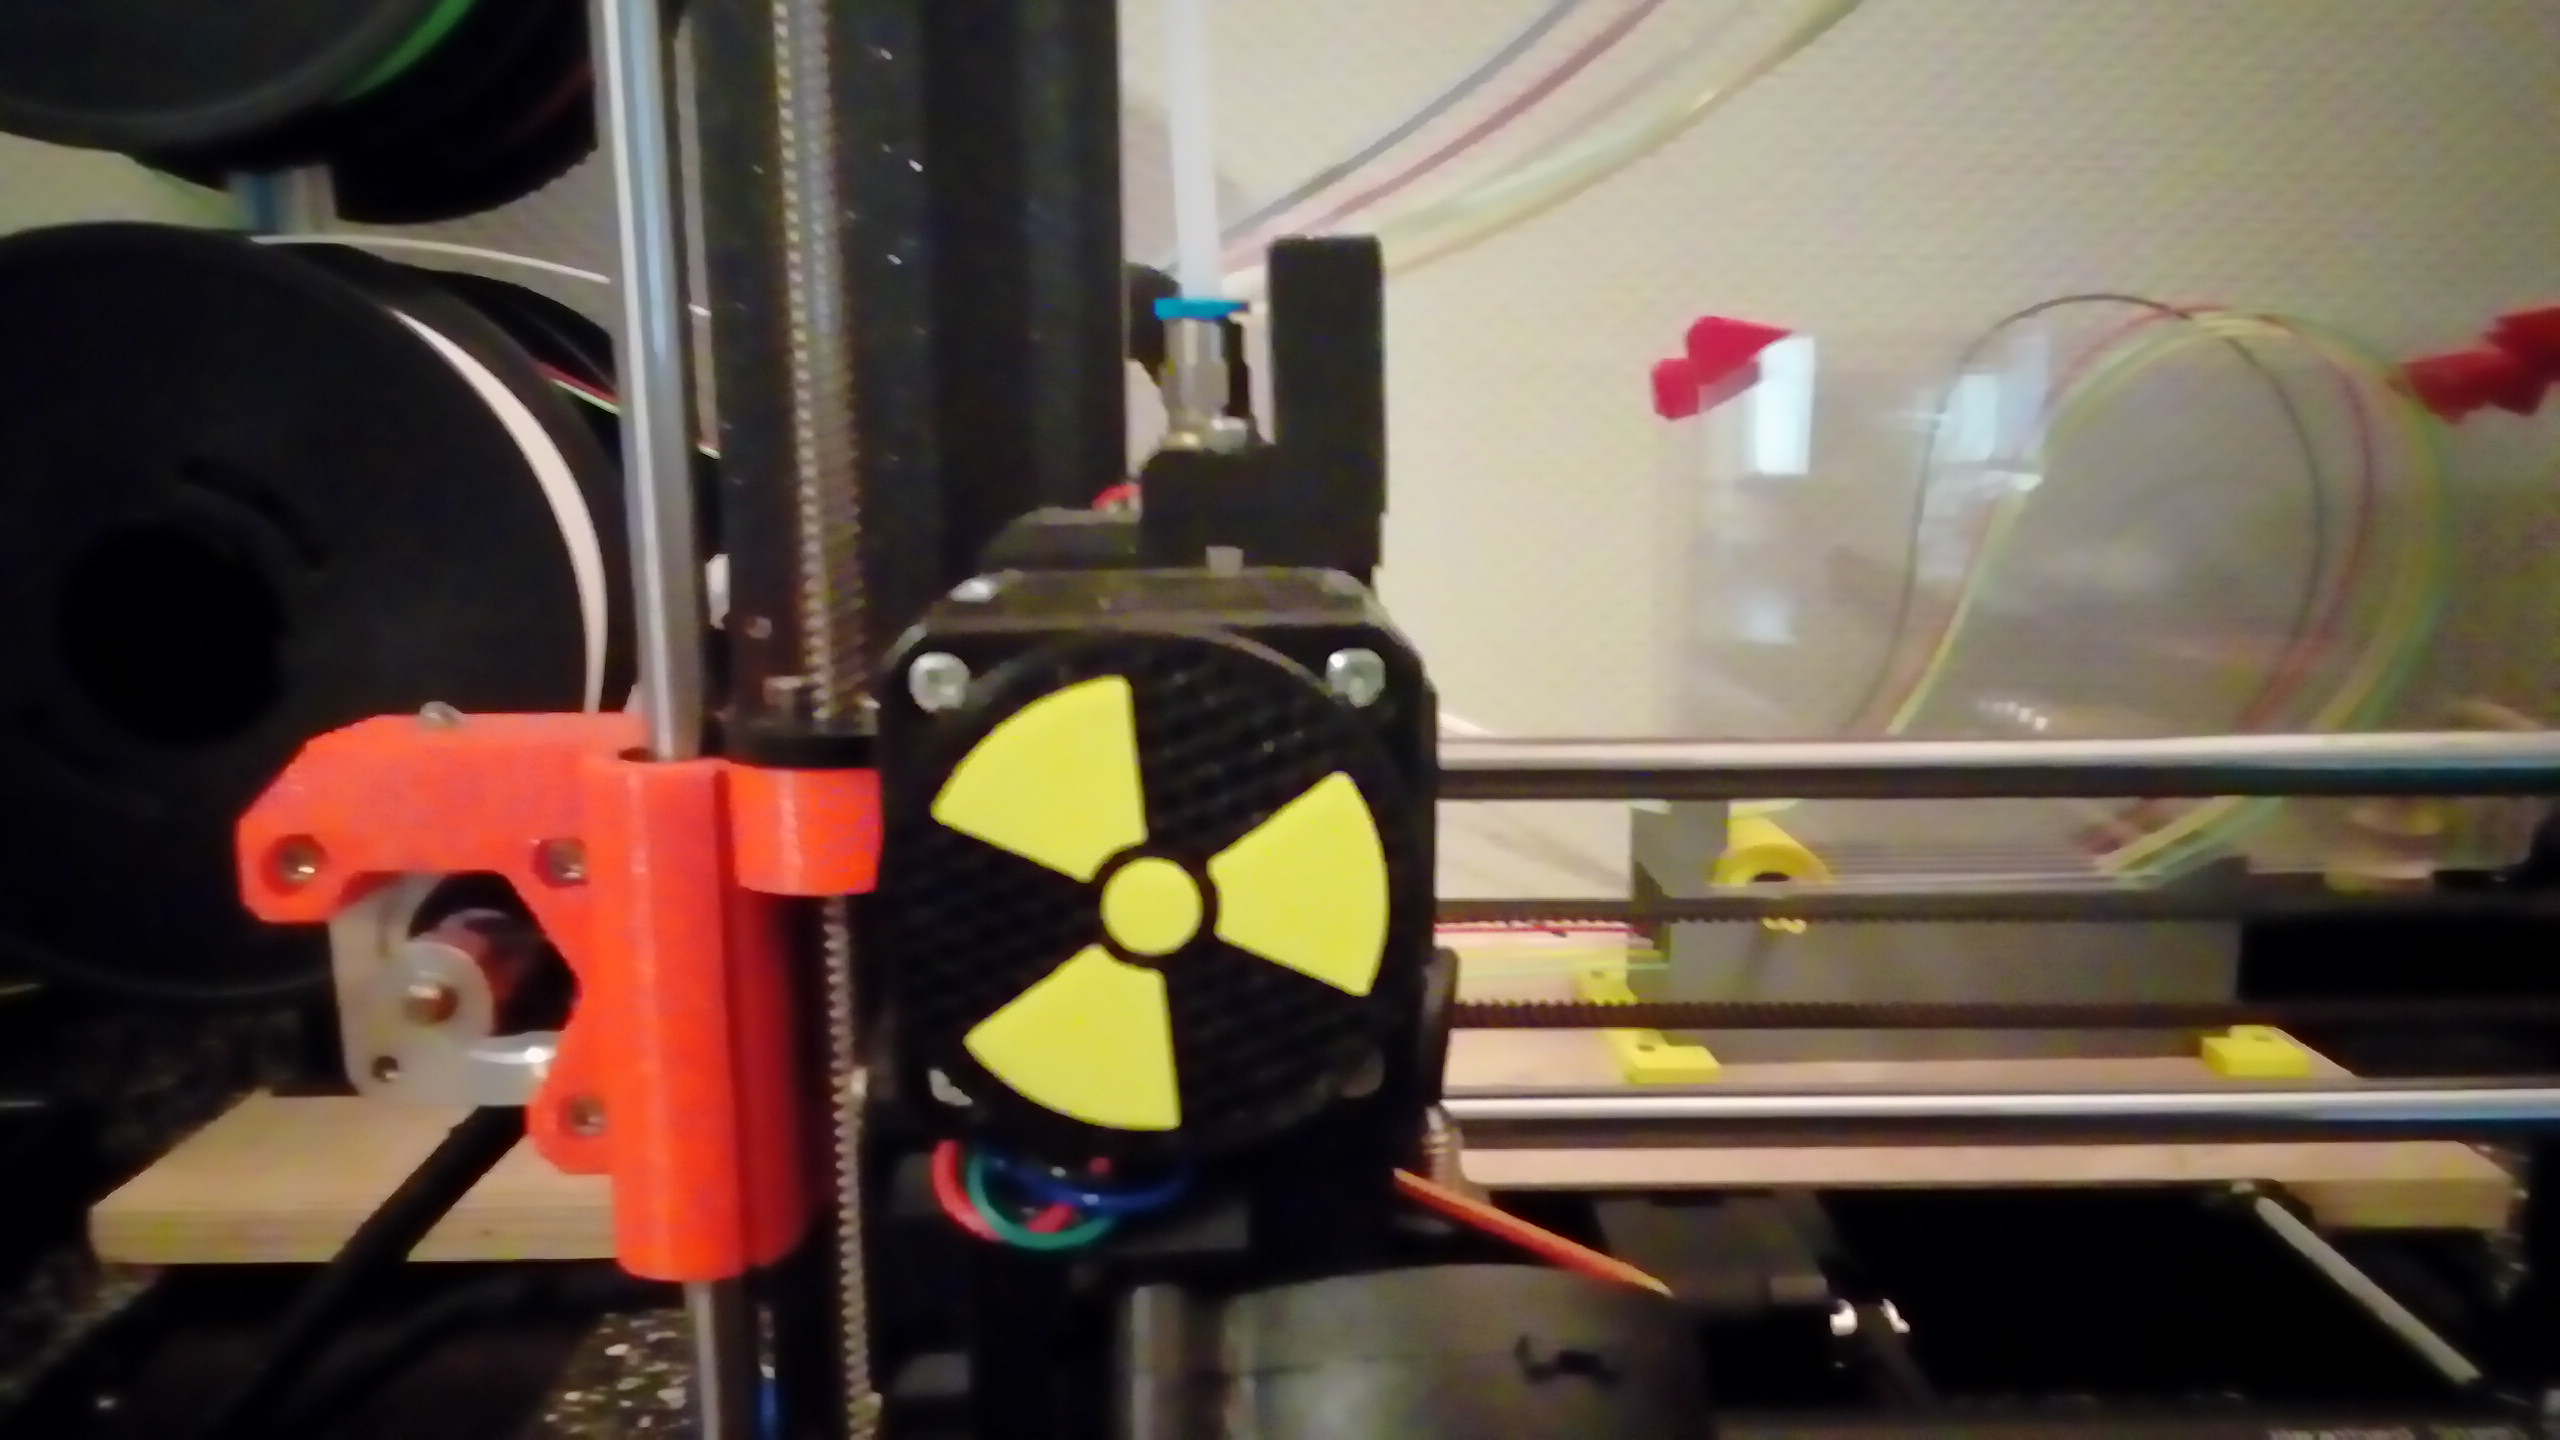 Prusa Extruder Rotation Visualizer Nuclear